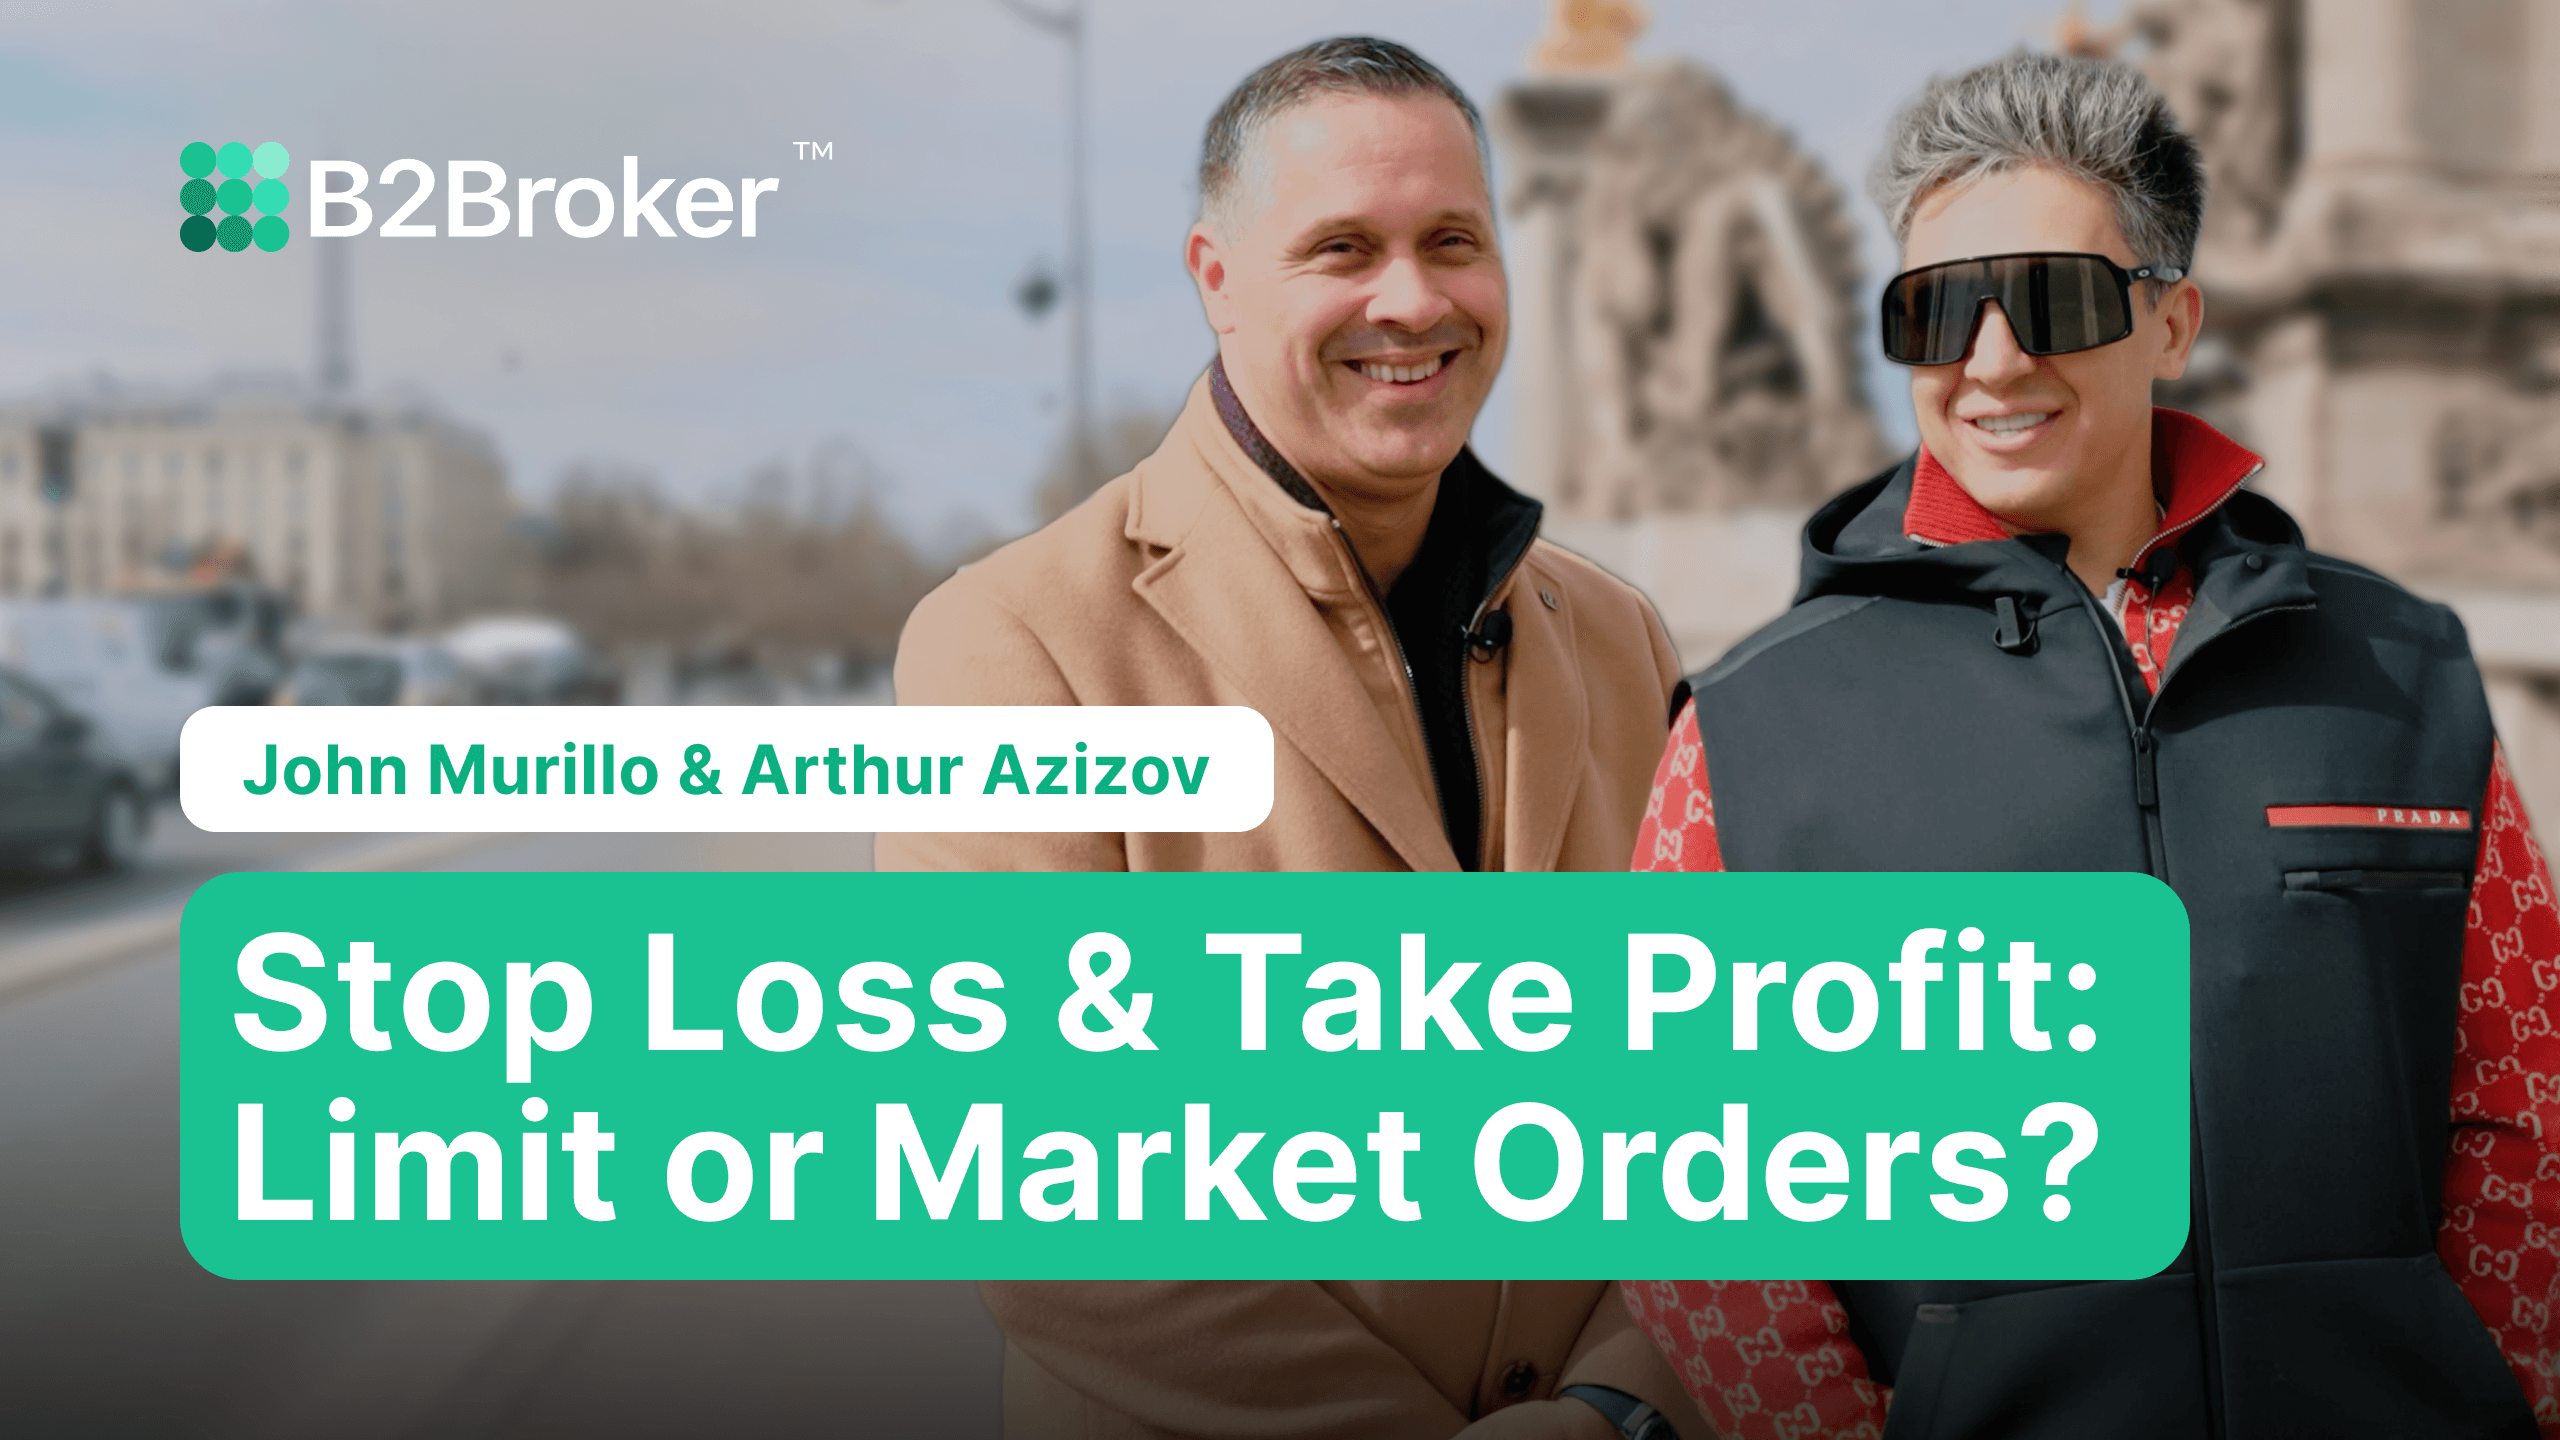 Stop Loss & Take Profit: Limit or Market Orders?